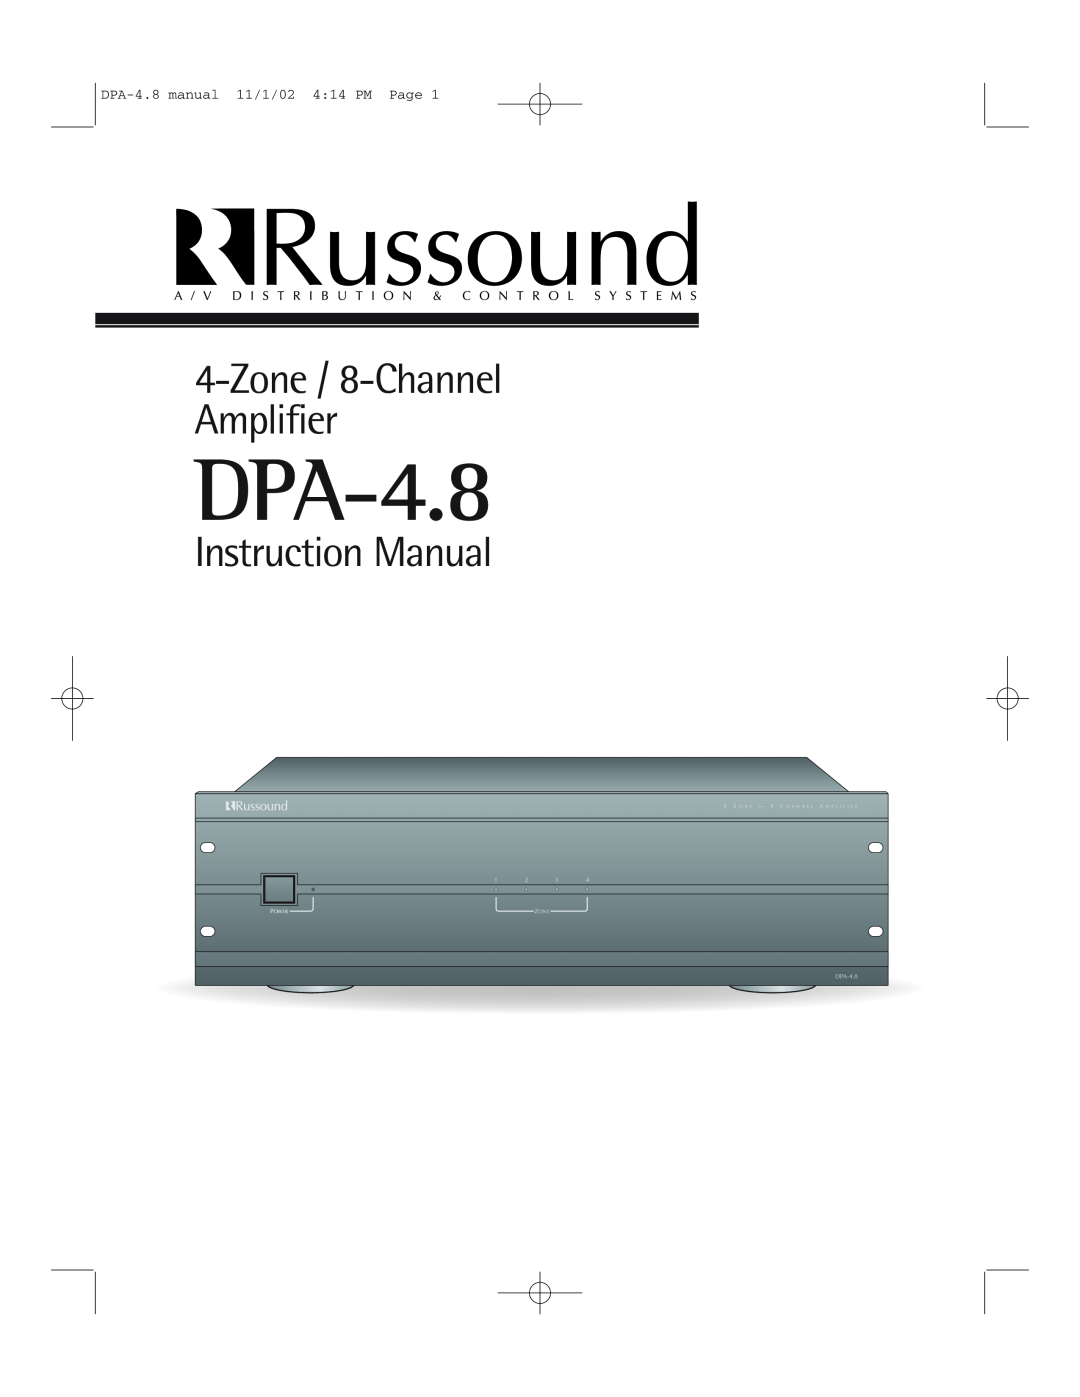 Russound instruction manual Zone / 8-ChannelAmplifier, DPA-4.8manual 11/1/02 4 14 PM Page, Power 